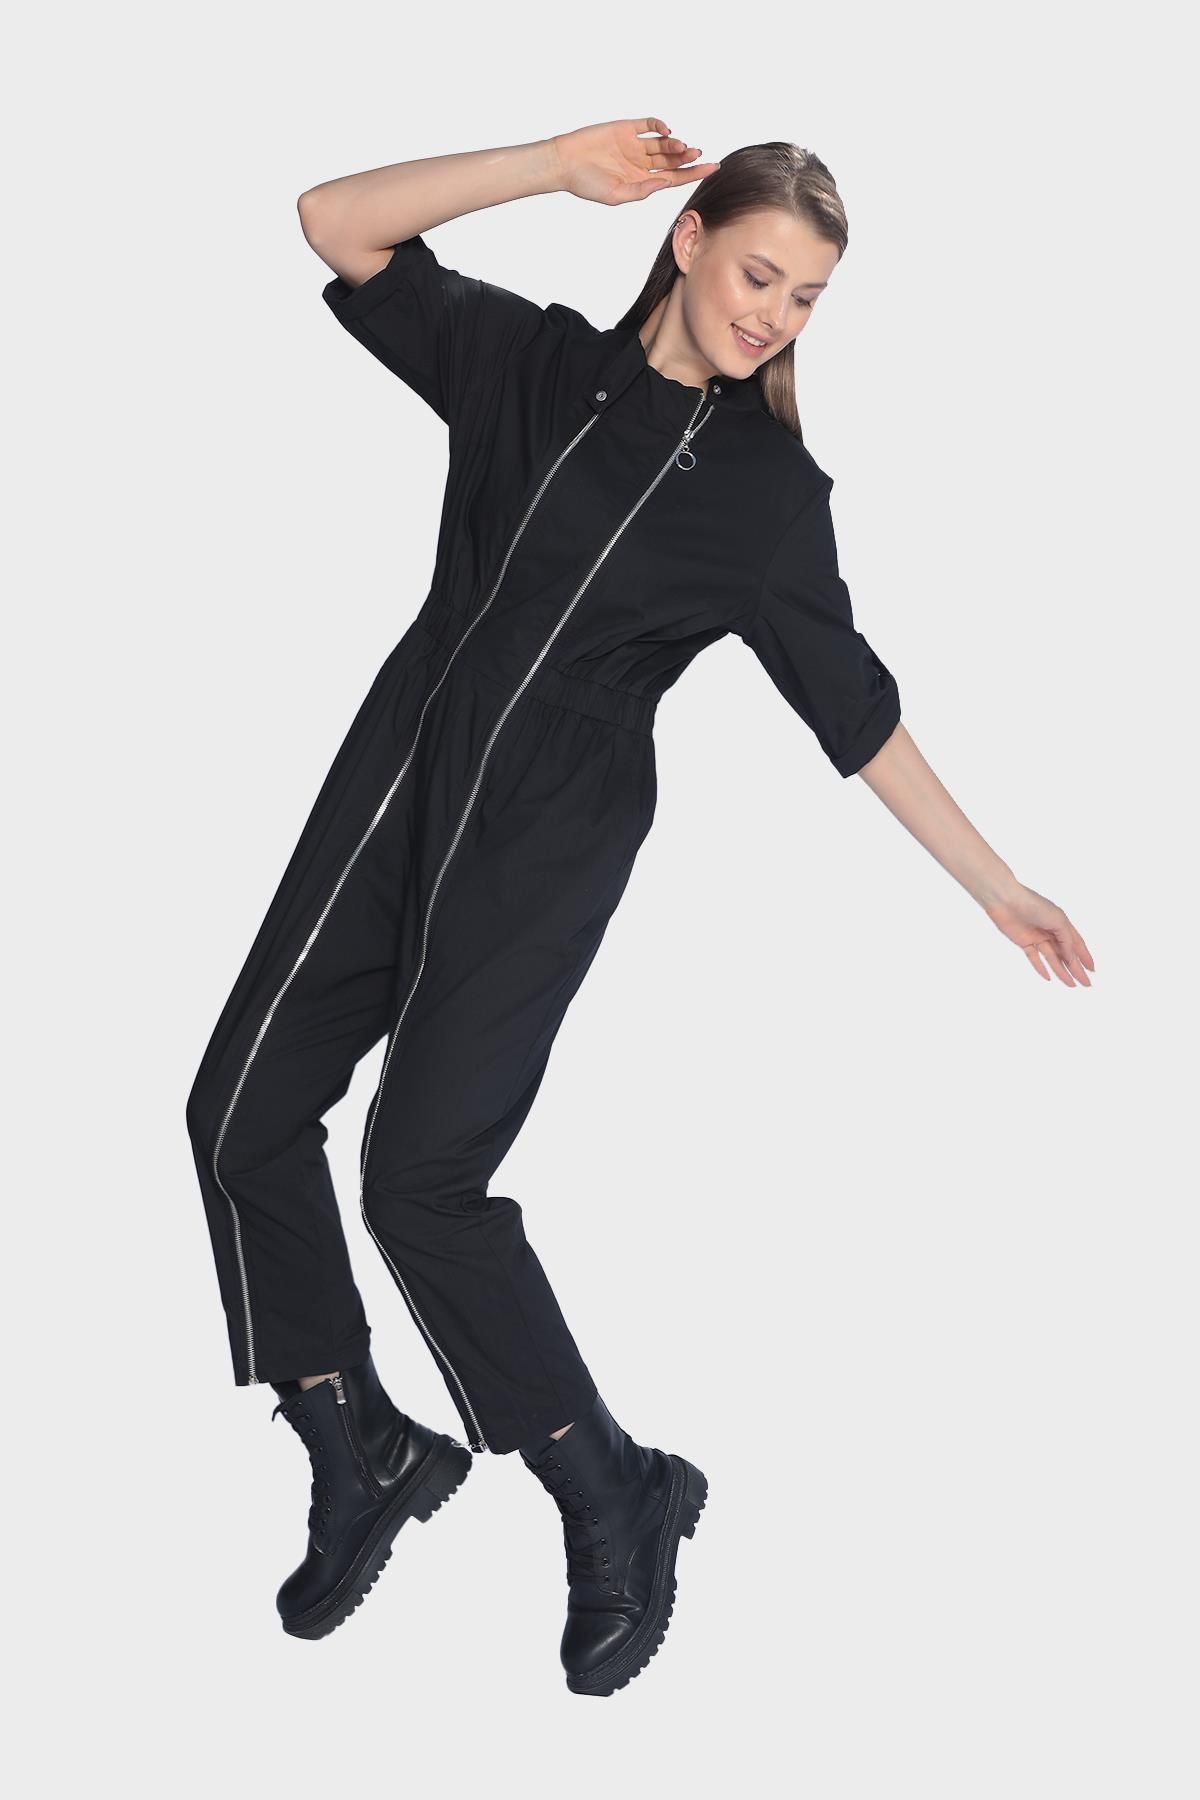 Womens sports style jumpsuit with round neckline and double zipper